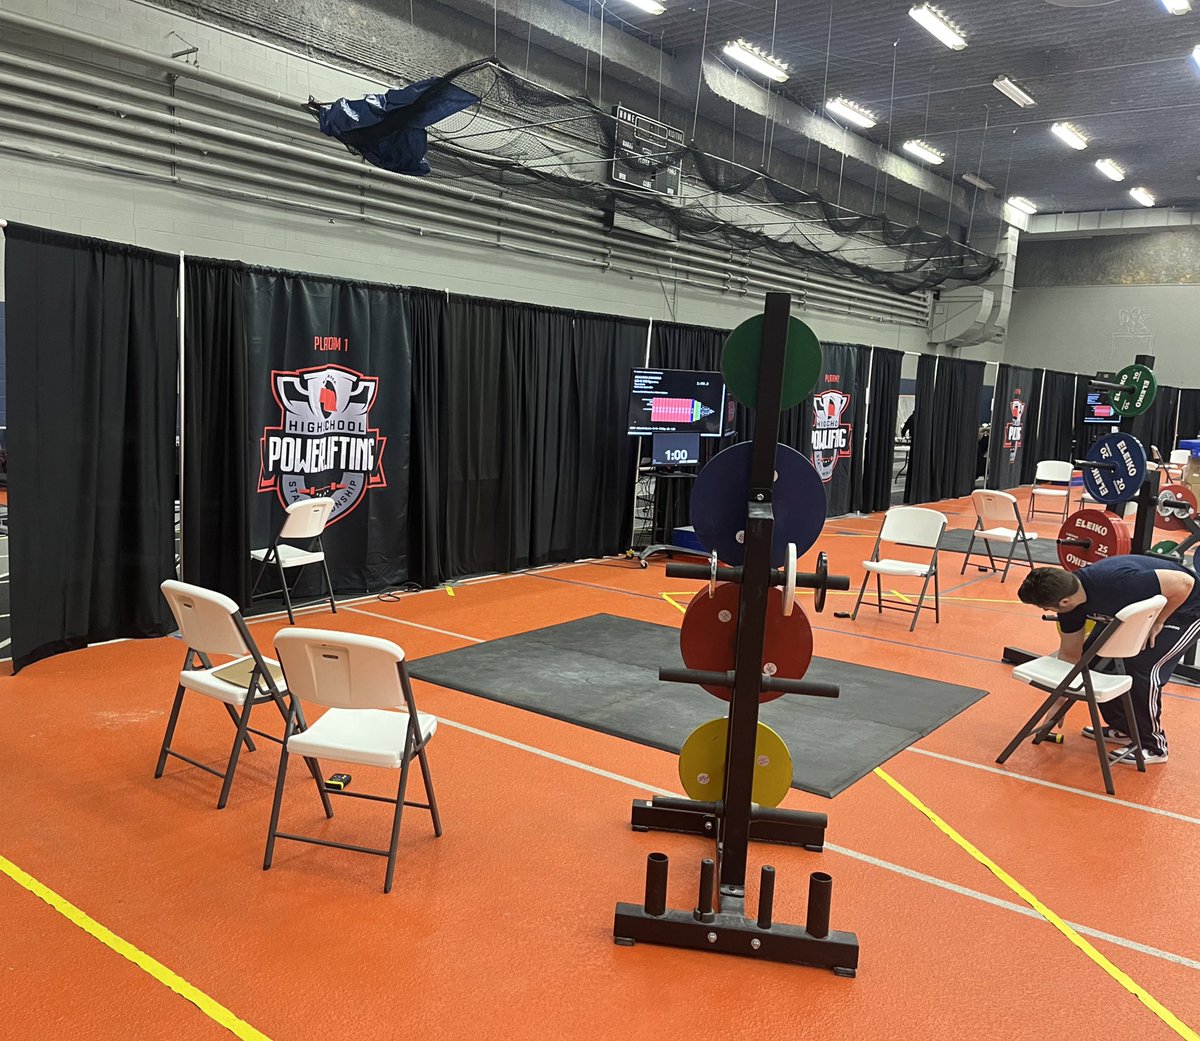 Excited to get this party started! 

#BEASTfam #ChieftainStrength #Powerlifting #HighSchoolPowerlifting #StateChampionships #ChangeYourBest #KeepgROWing